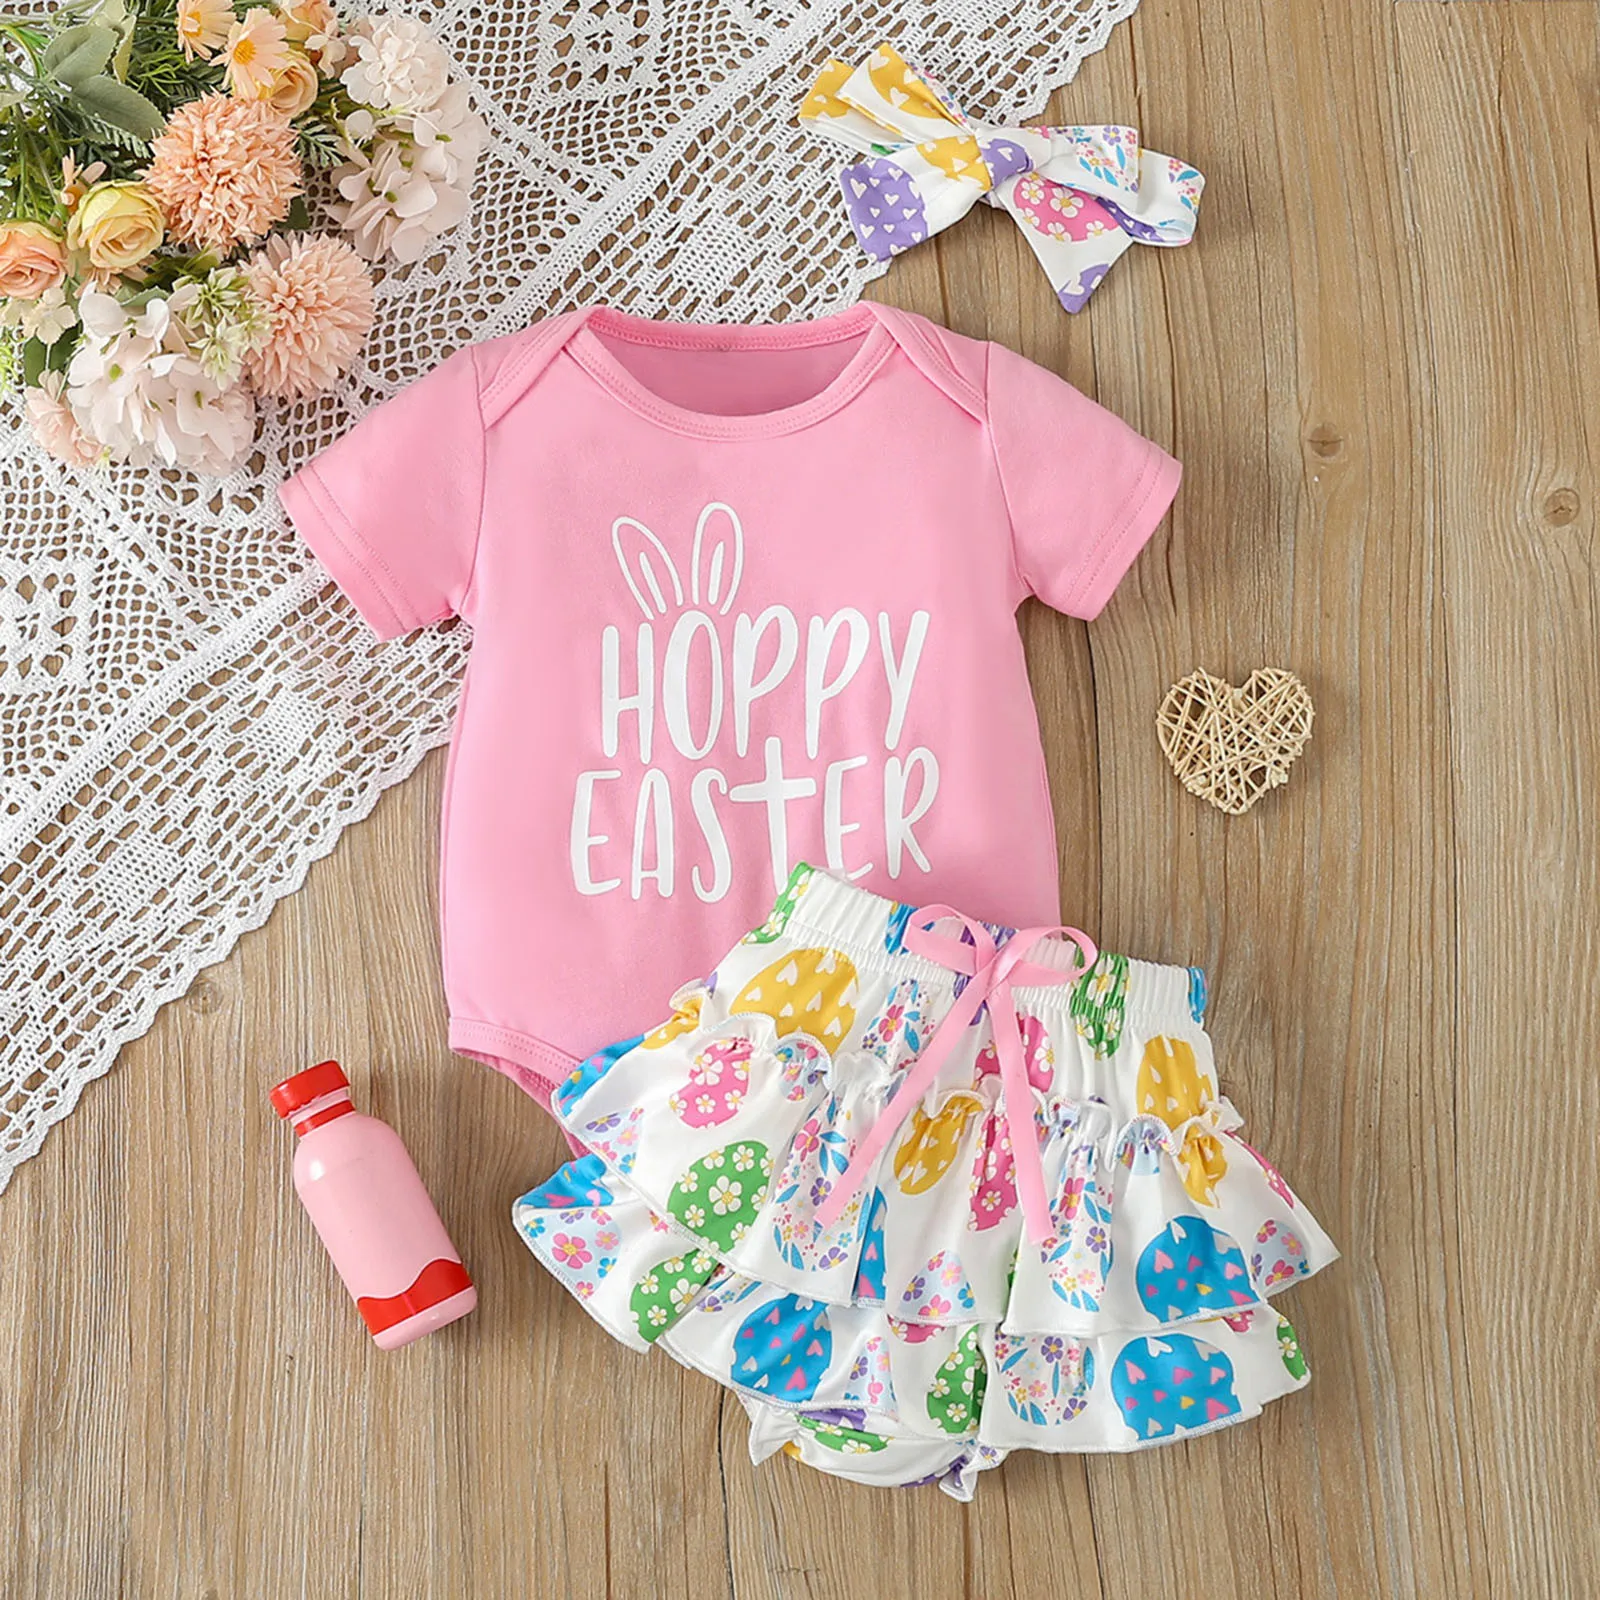 

3pcs Baby Girl Clothes Sets Easter Outfit Letter Print Short Sleeve Romper Bunny Print Shorts Headband Summer Baby Clothes 0-24M